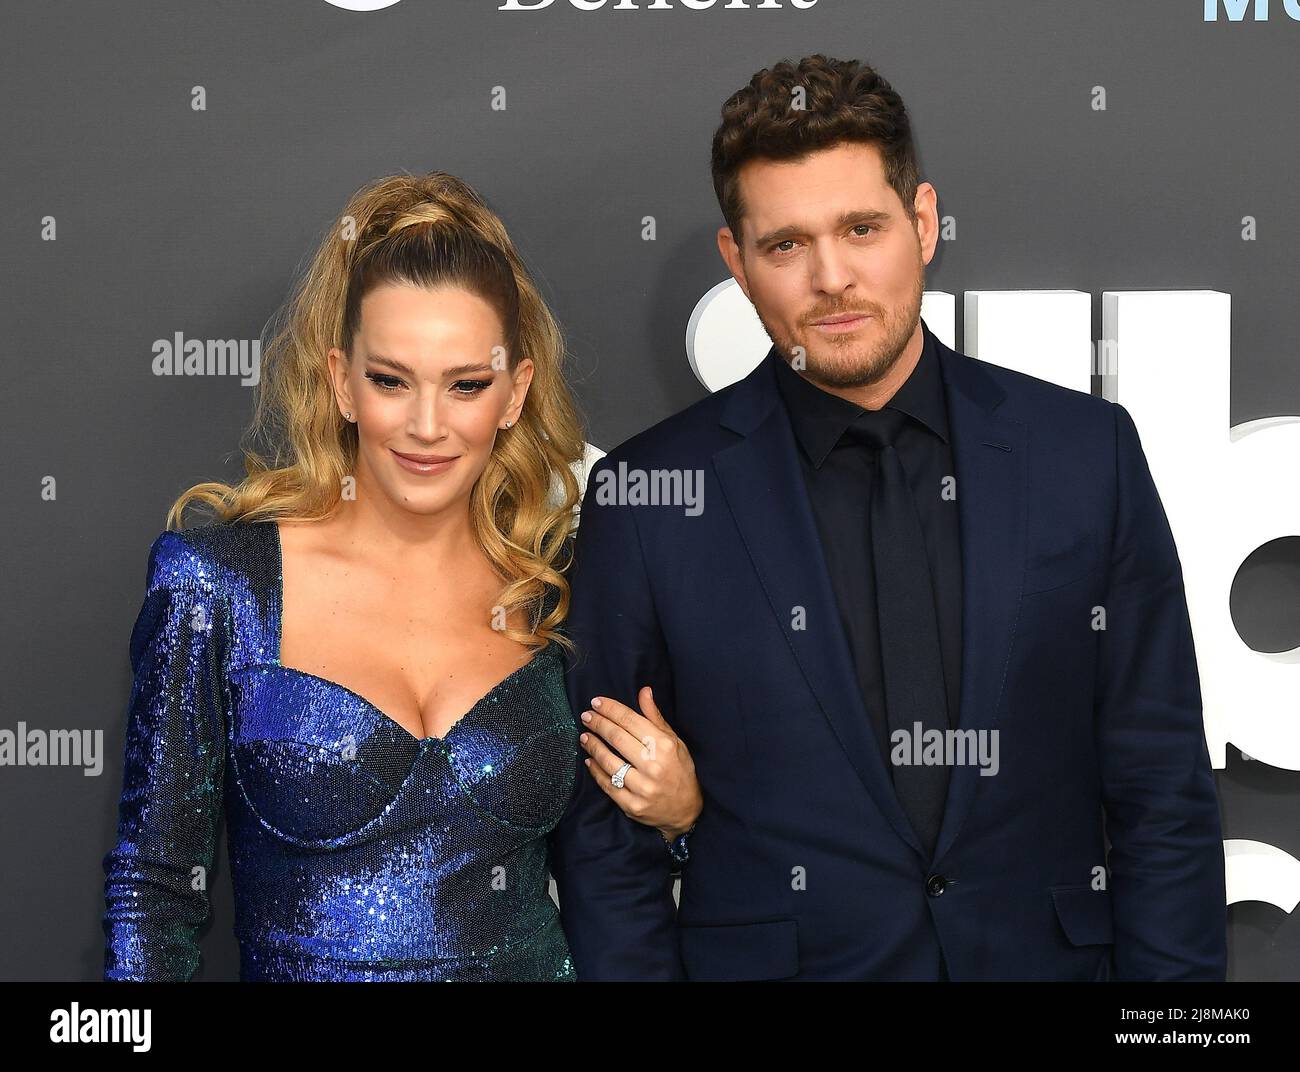 Las Vegas, Nevada, May 15, 2022, Michael Buble and Luisana Lopilato attends the 2022 Billboard Music Awards at MGM Grand Garden Arena on May 15, 2022 in Las Vegas, Nevada. Photo: Casey Flanigan/imageSPACE/MediaPunch Stock Photo